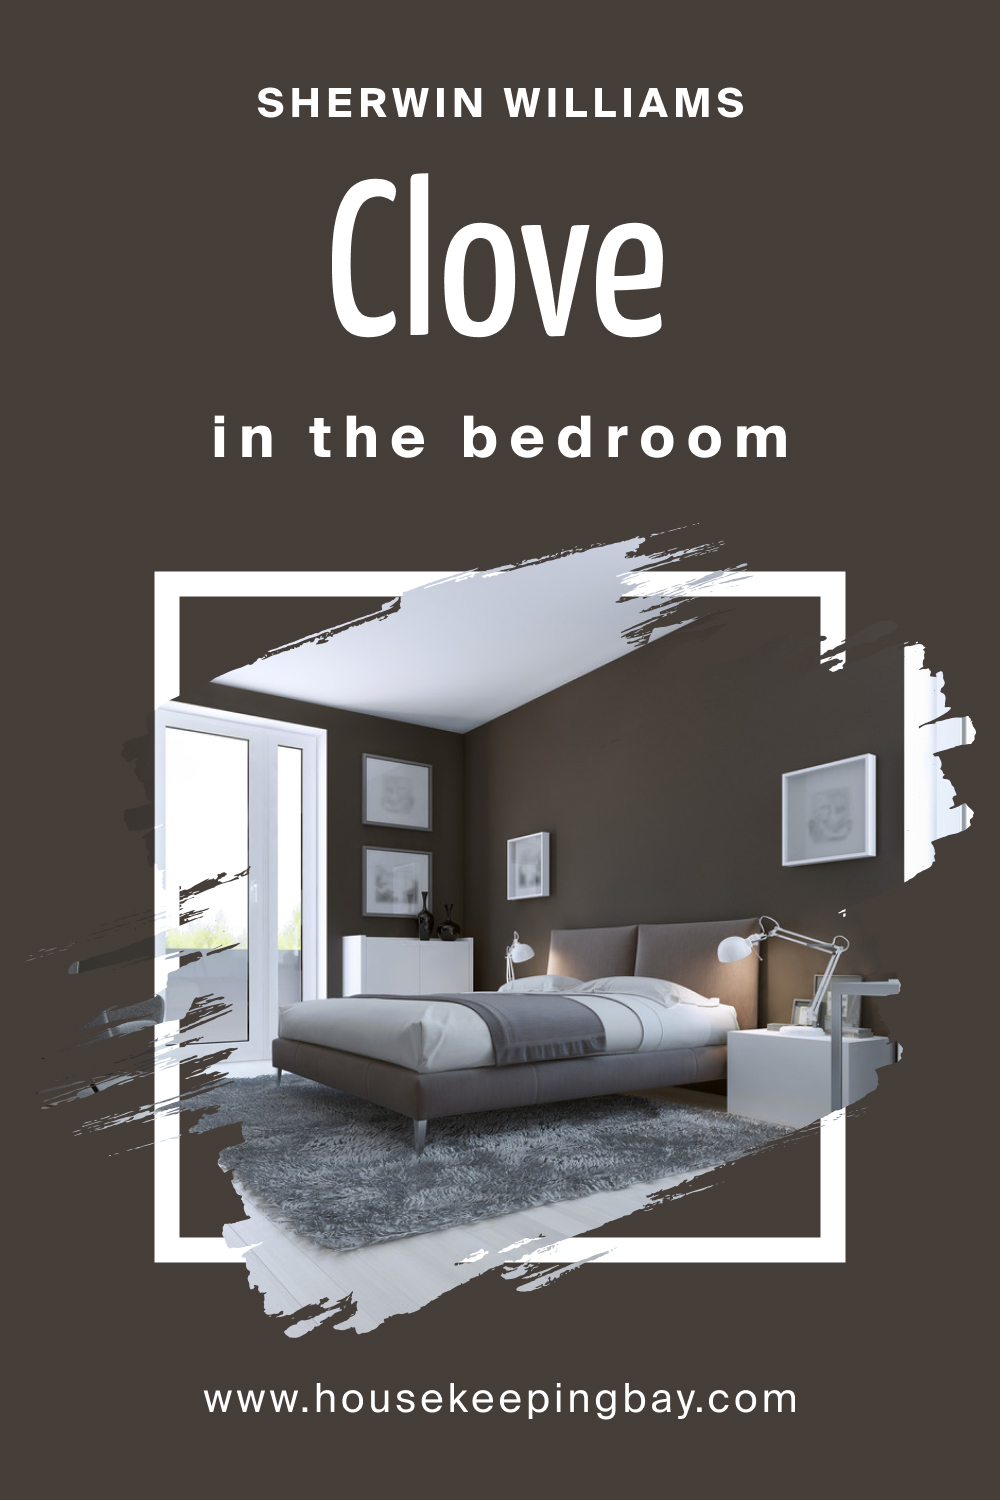 Sherwin Williams. SW 9605 Clove For the bedroom